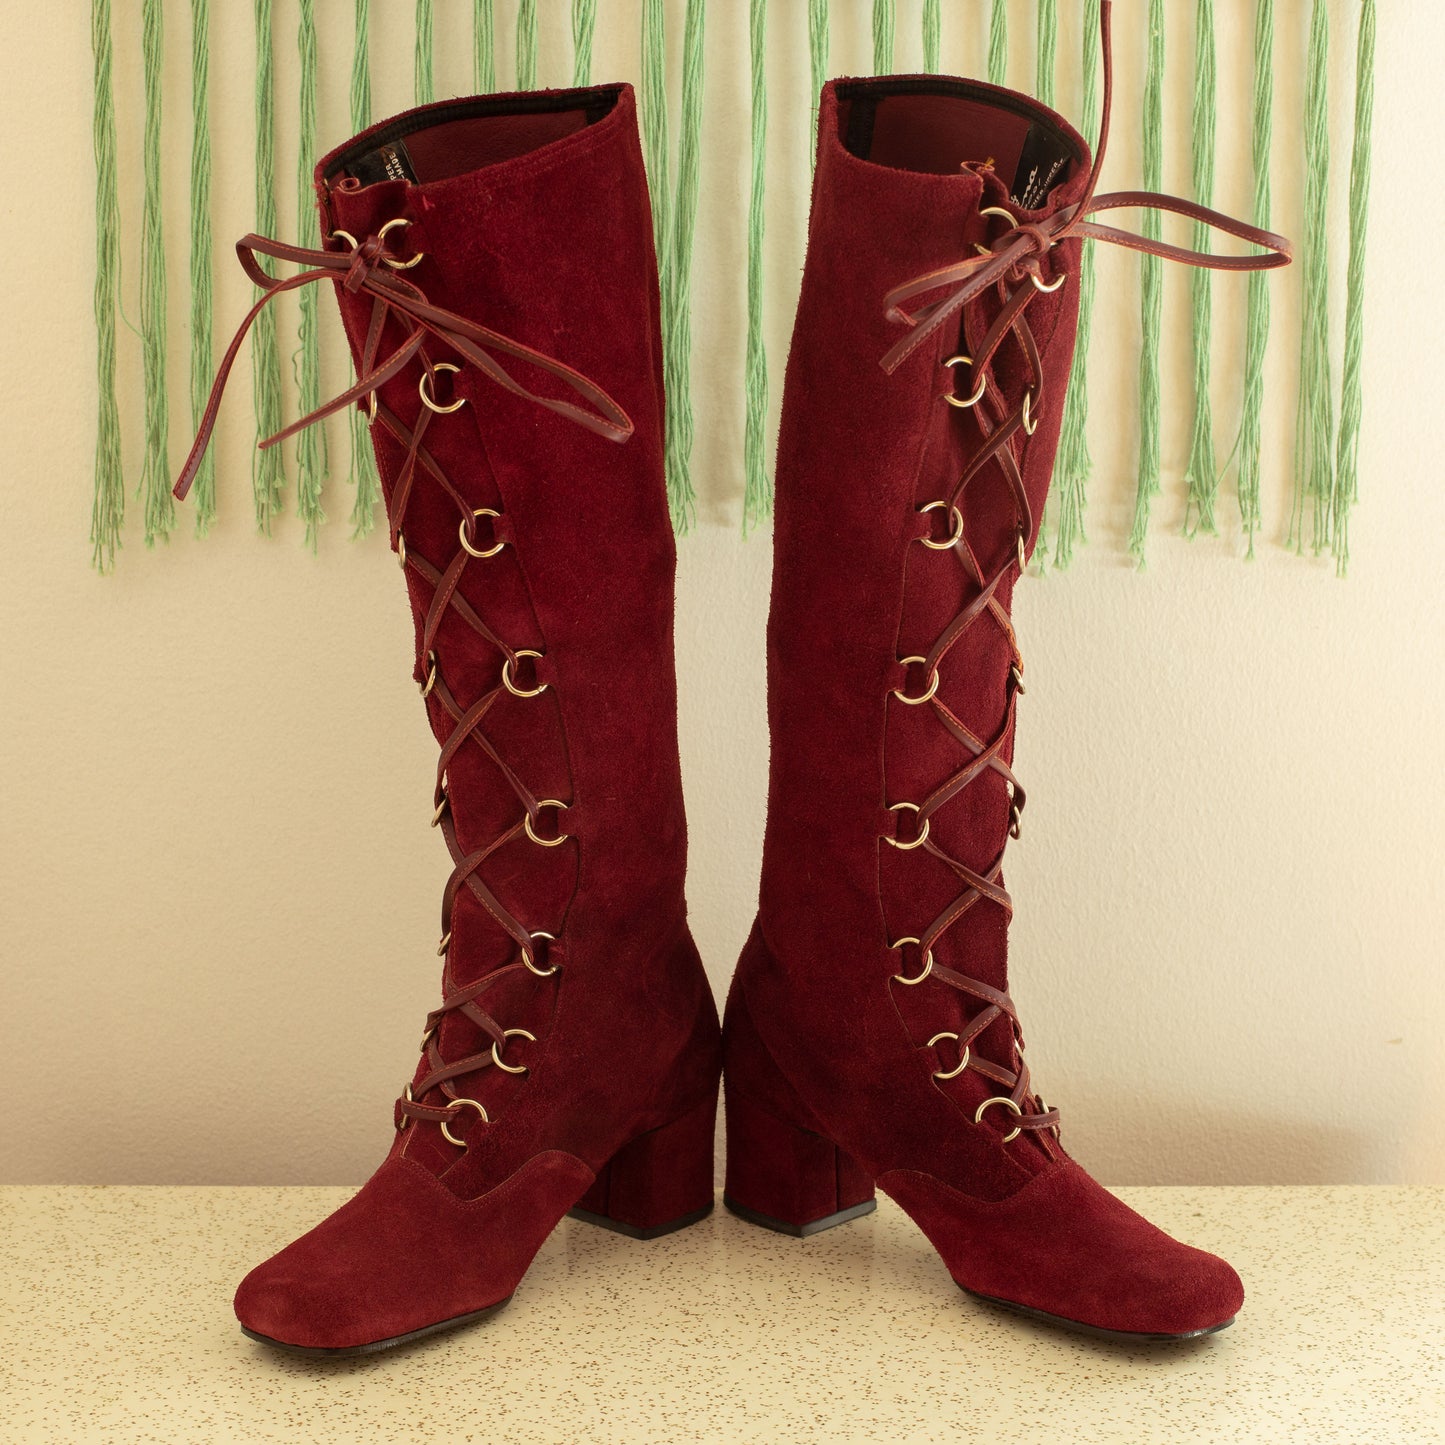 Vintage 1960s Red Suede Lace Up Gogo Boots